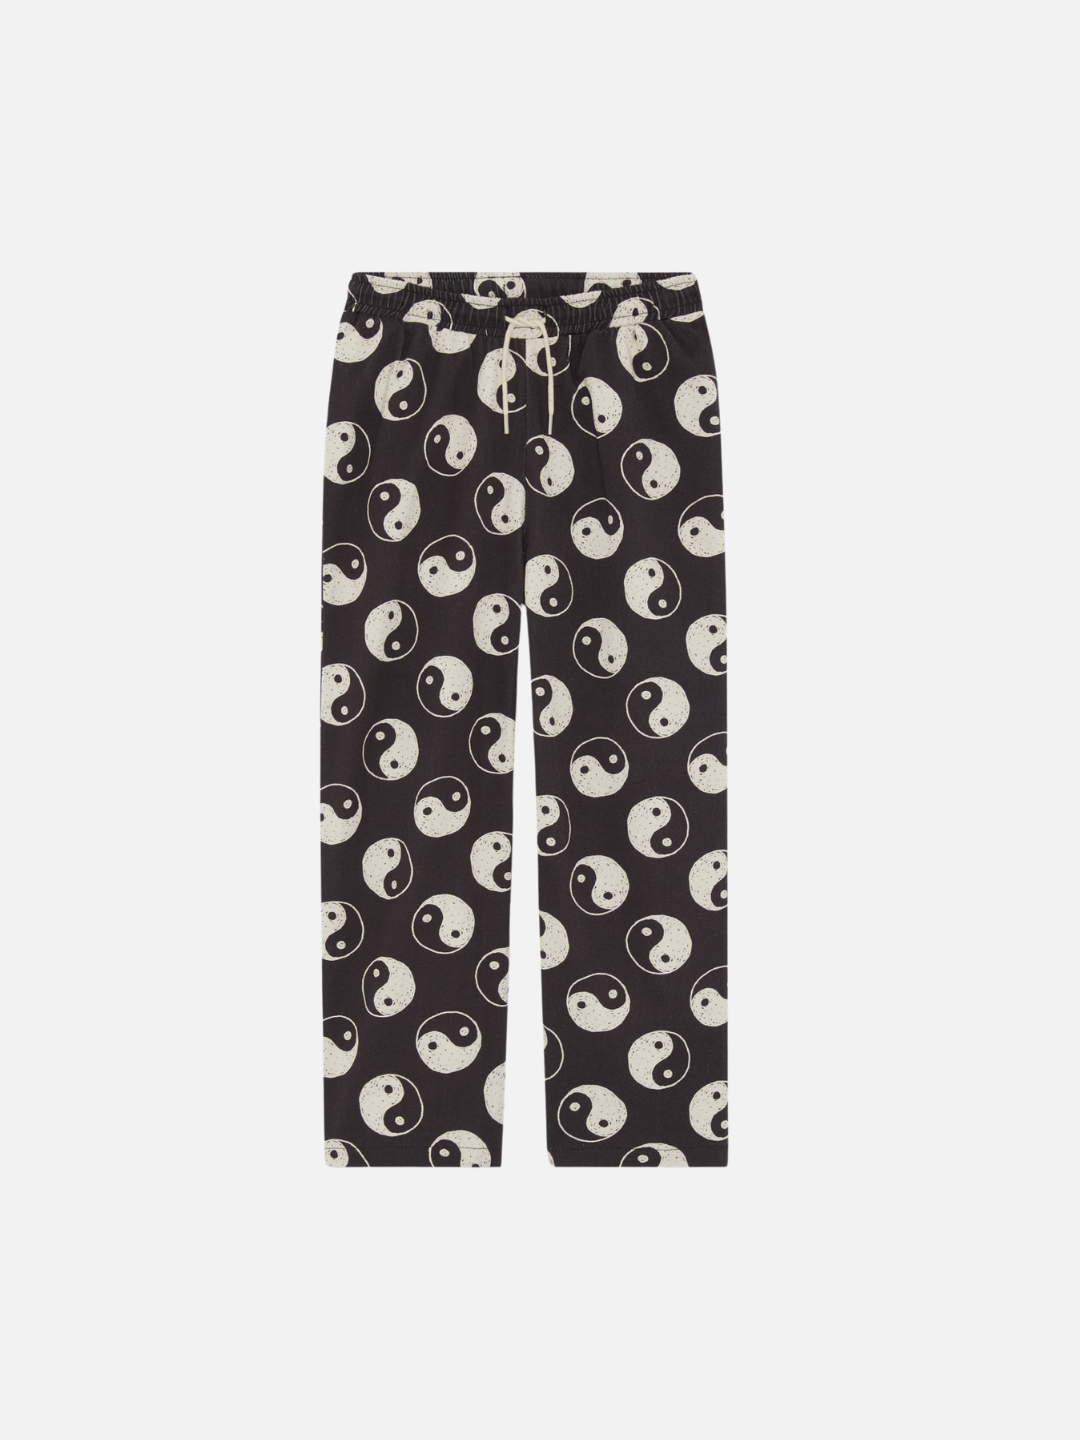 A front view of the drawstring black pants with a yin and yang pattern all over.